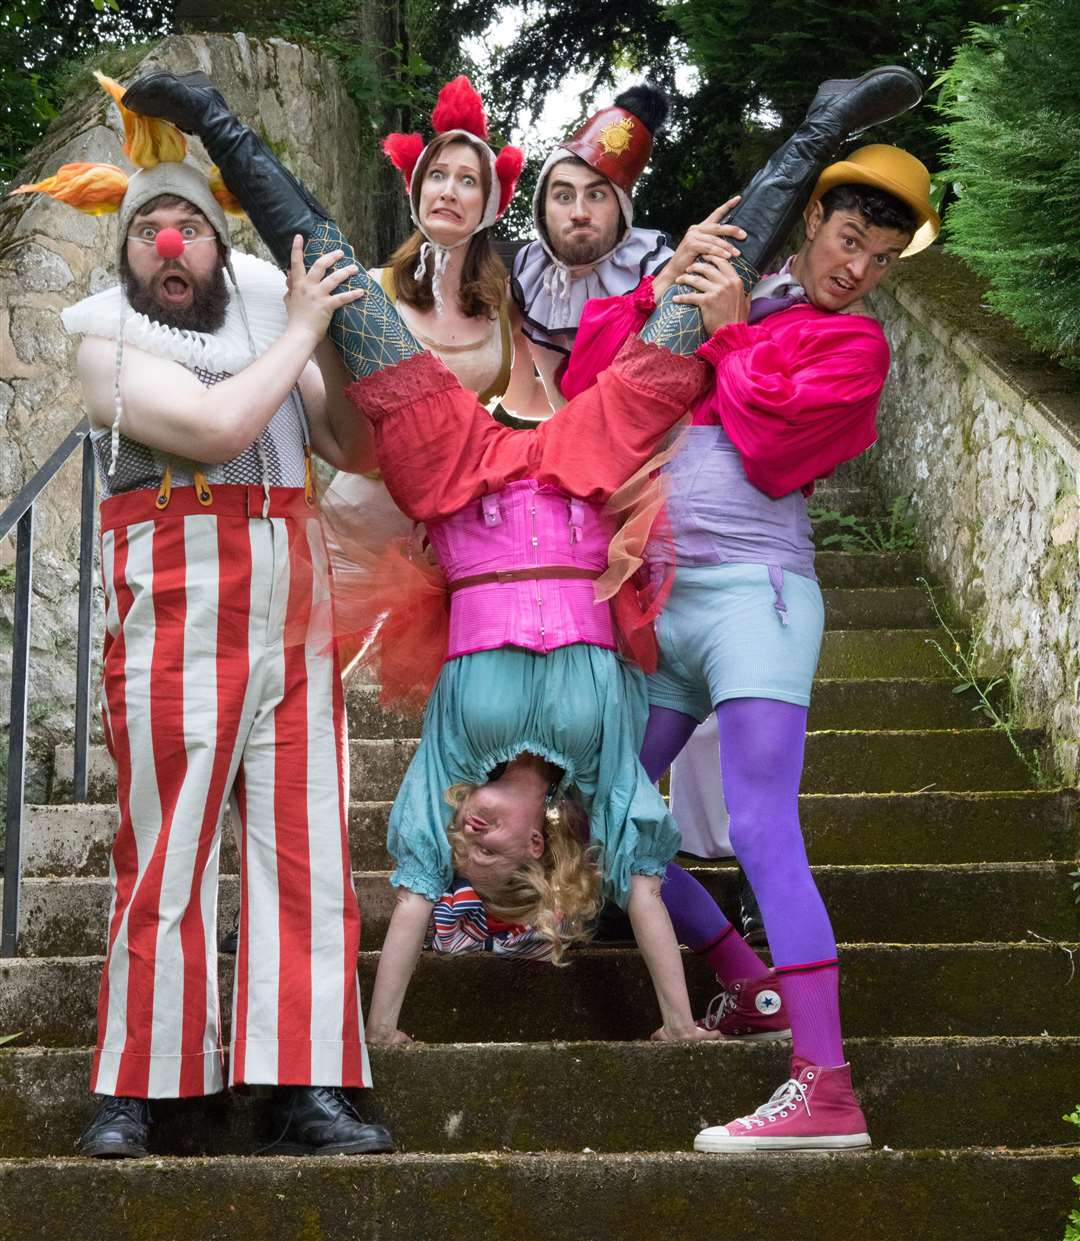 Look out for the Changeling troupe on tour this summer across Kent